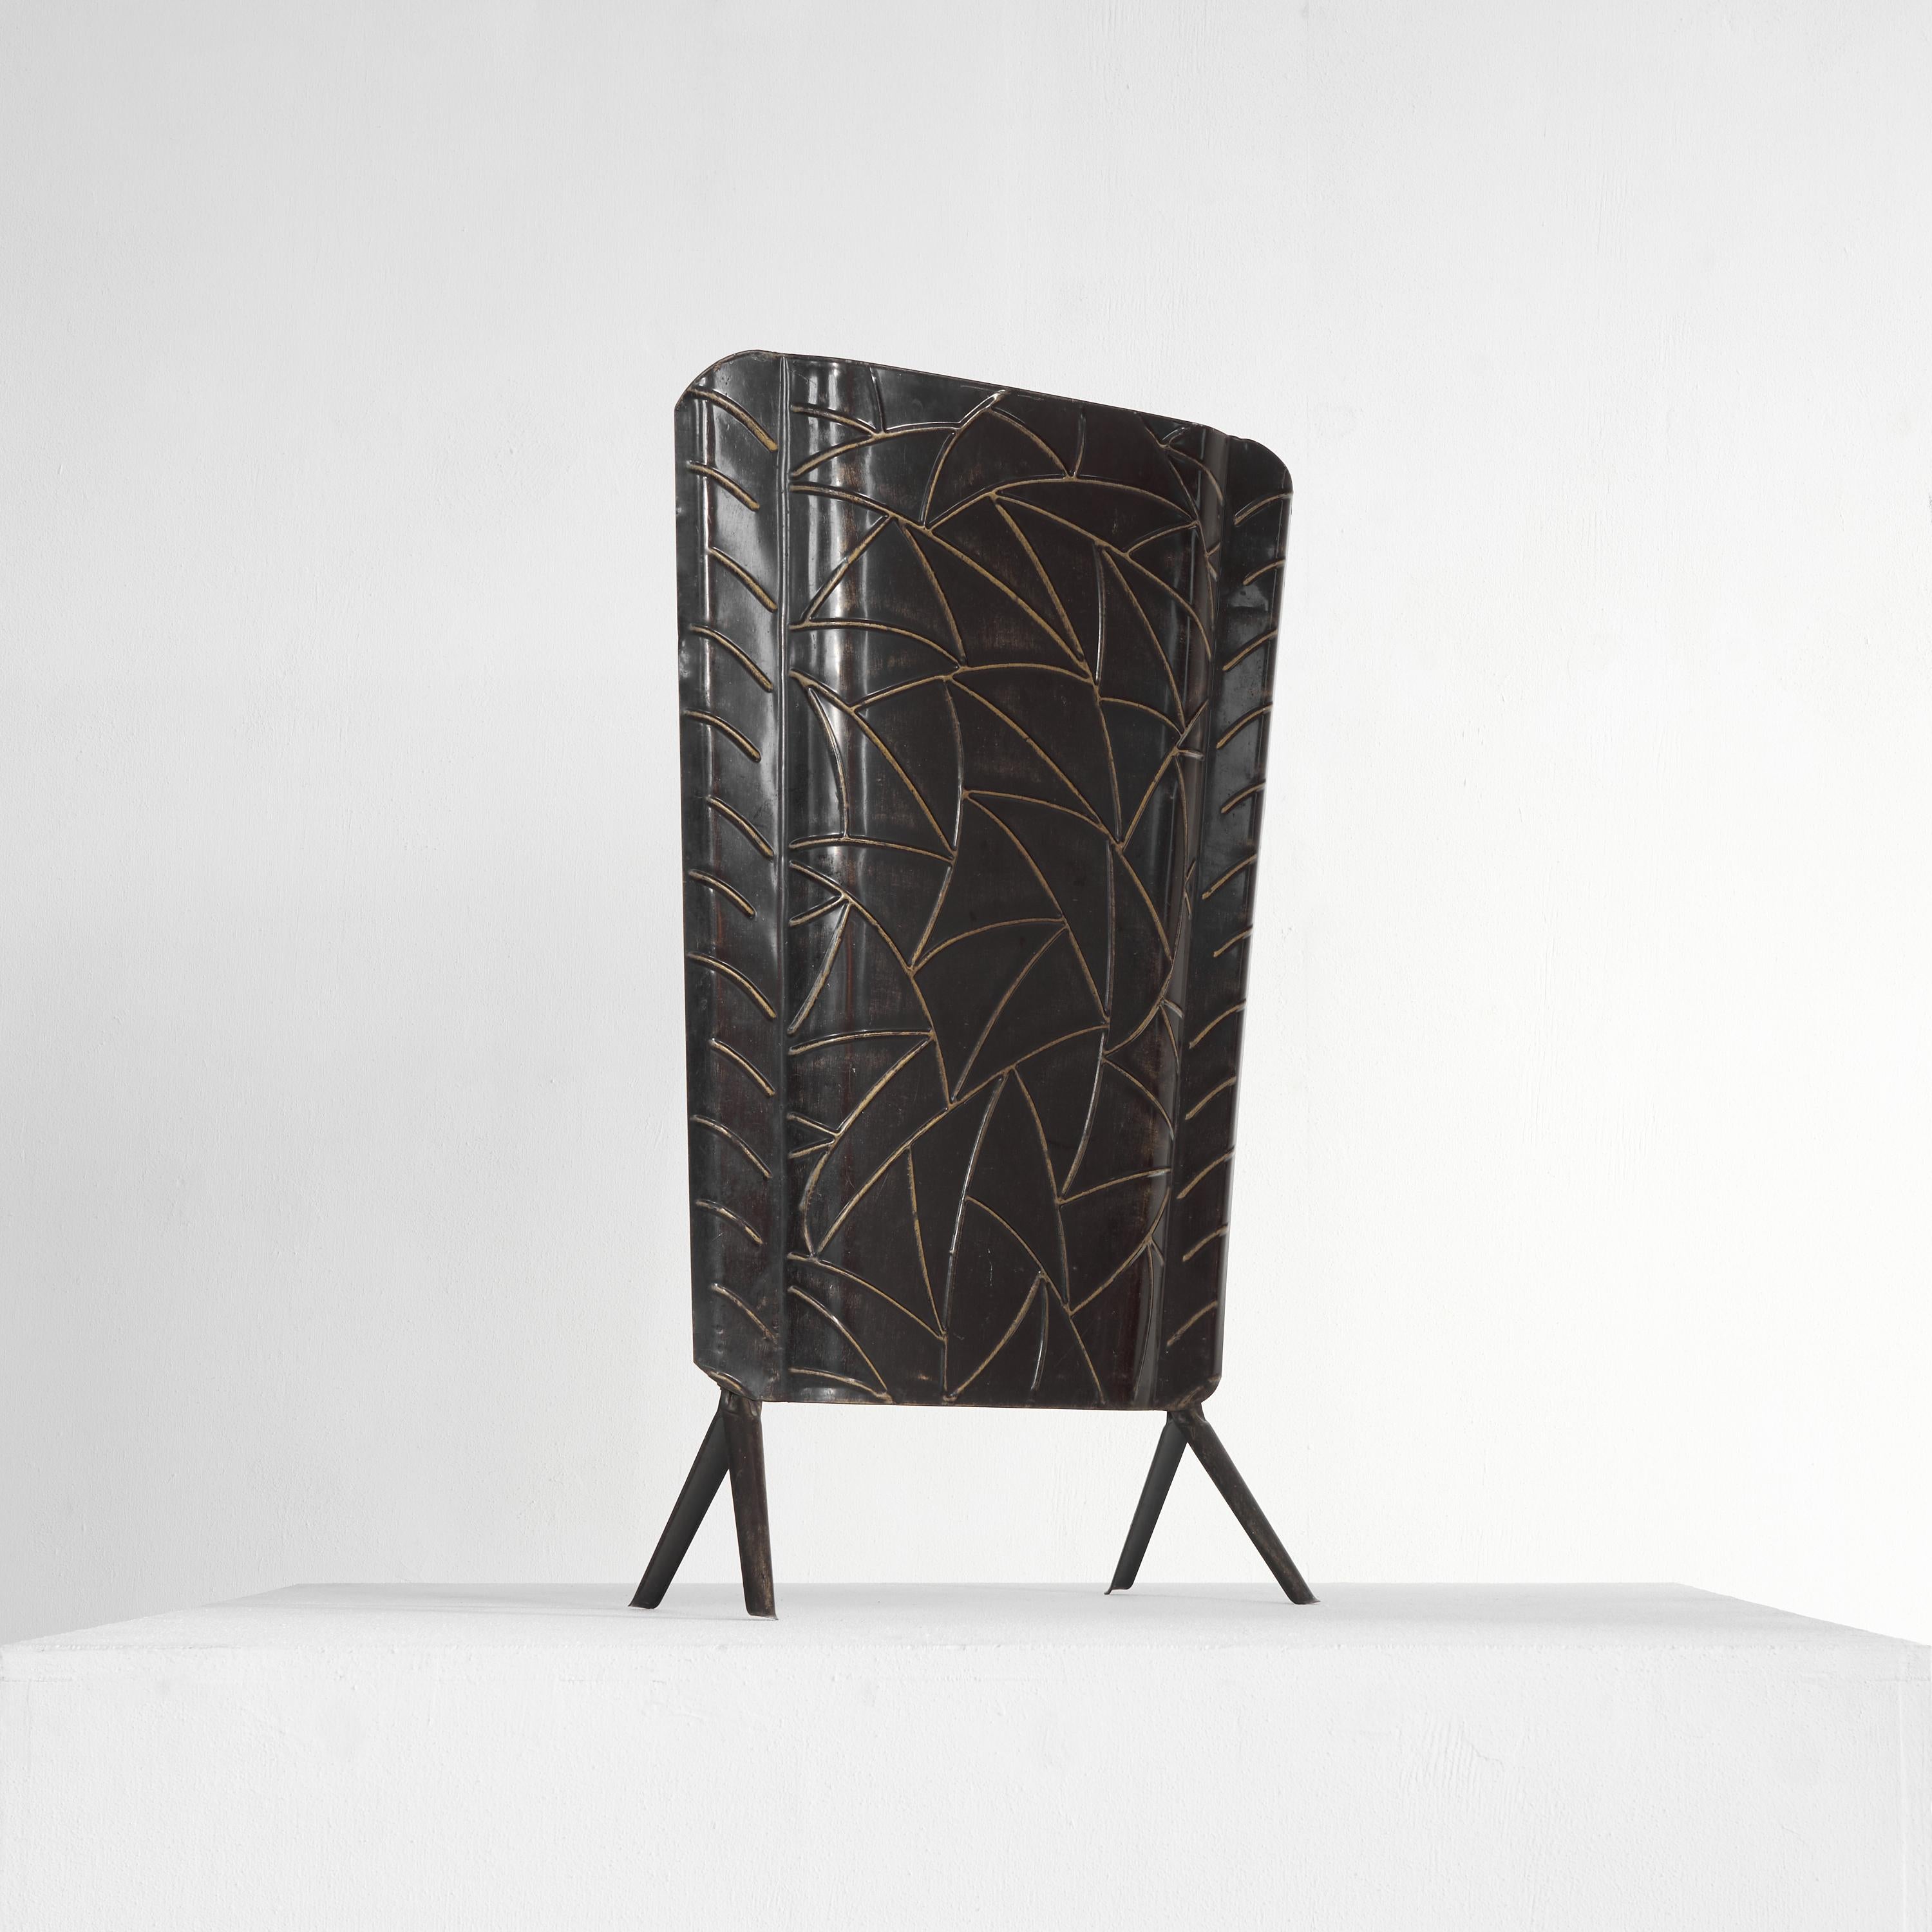 Art Deco fire screen in tin, 1940s. 

This is a very decorative fire screen made out of tin, featuring a wonderful playful design resembling leaves or feathers in a very abstract way. It features a distinct art deco appearance. Also, the wear and